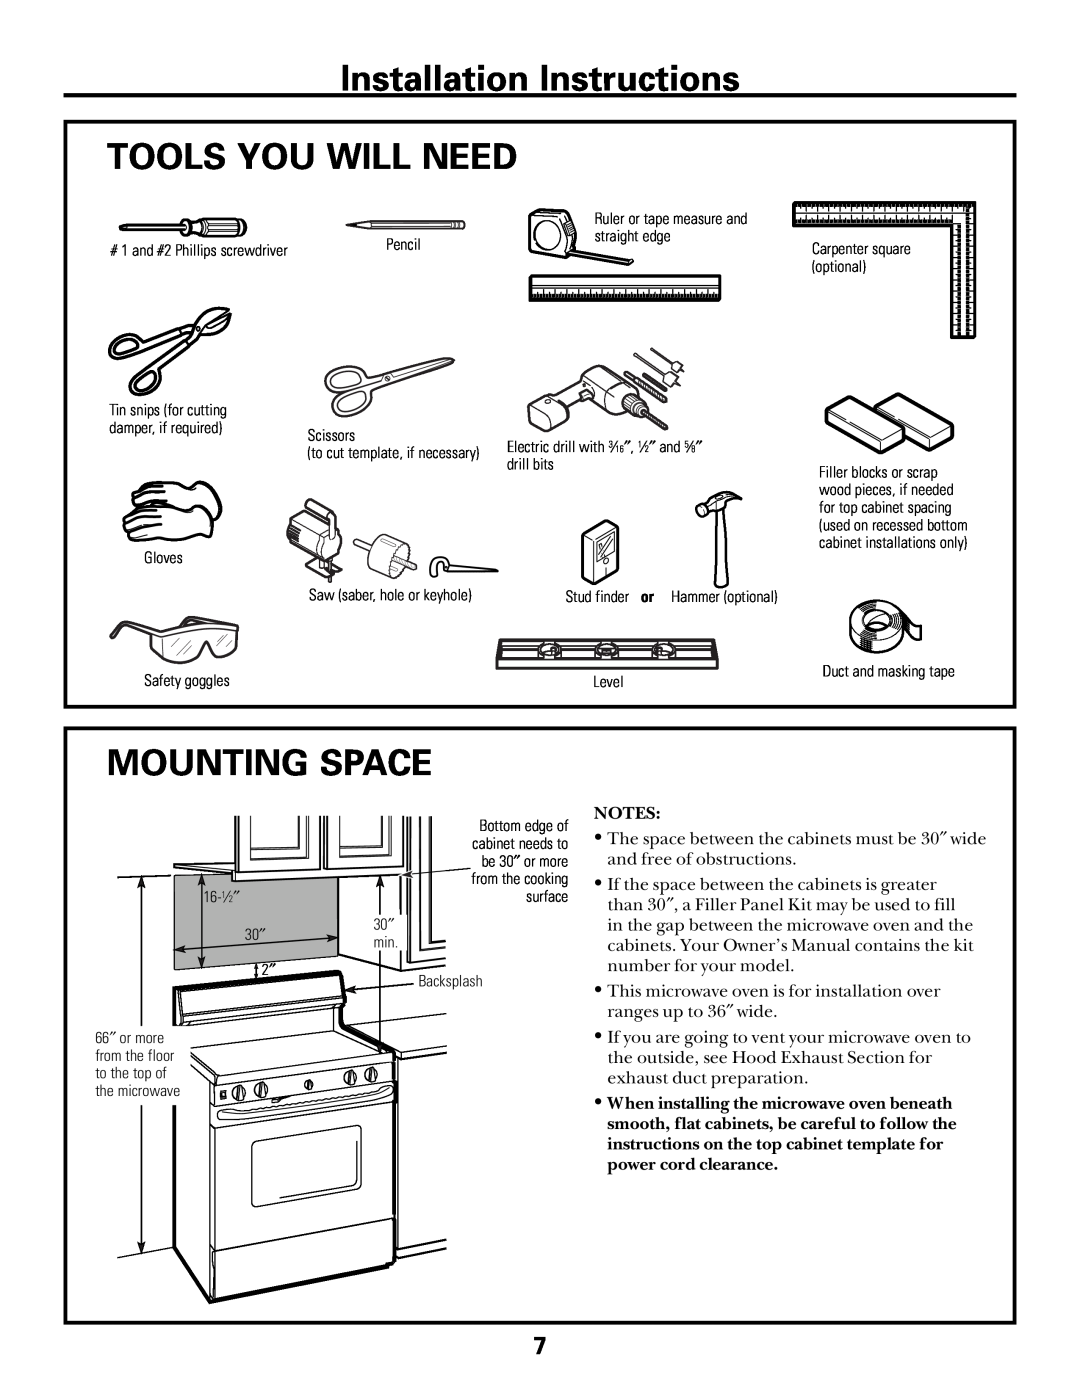 GE Over the Range Microwave Oven manual Installation Instructions TOOLS YOU WILL NEED, Mounting Space 